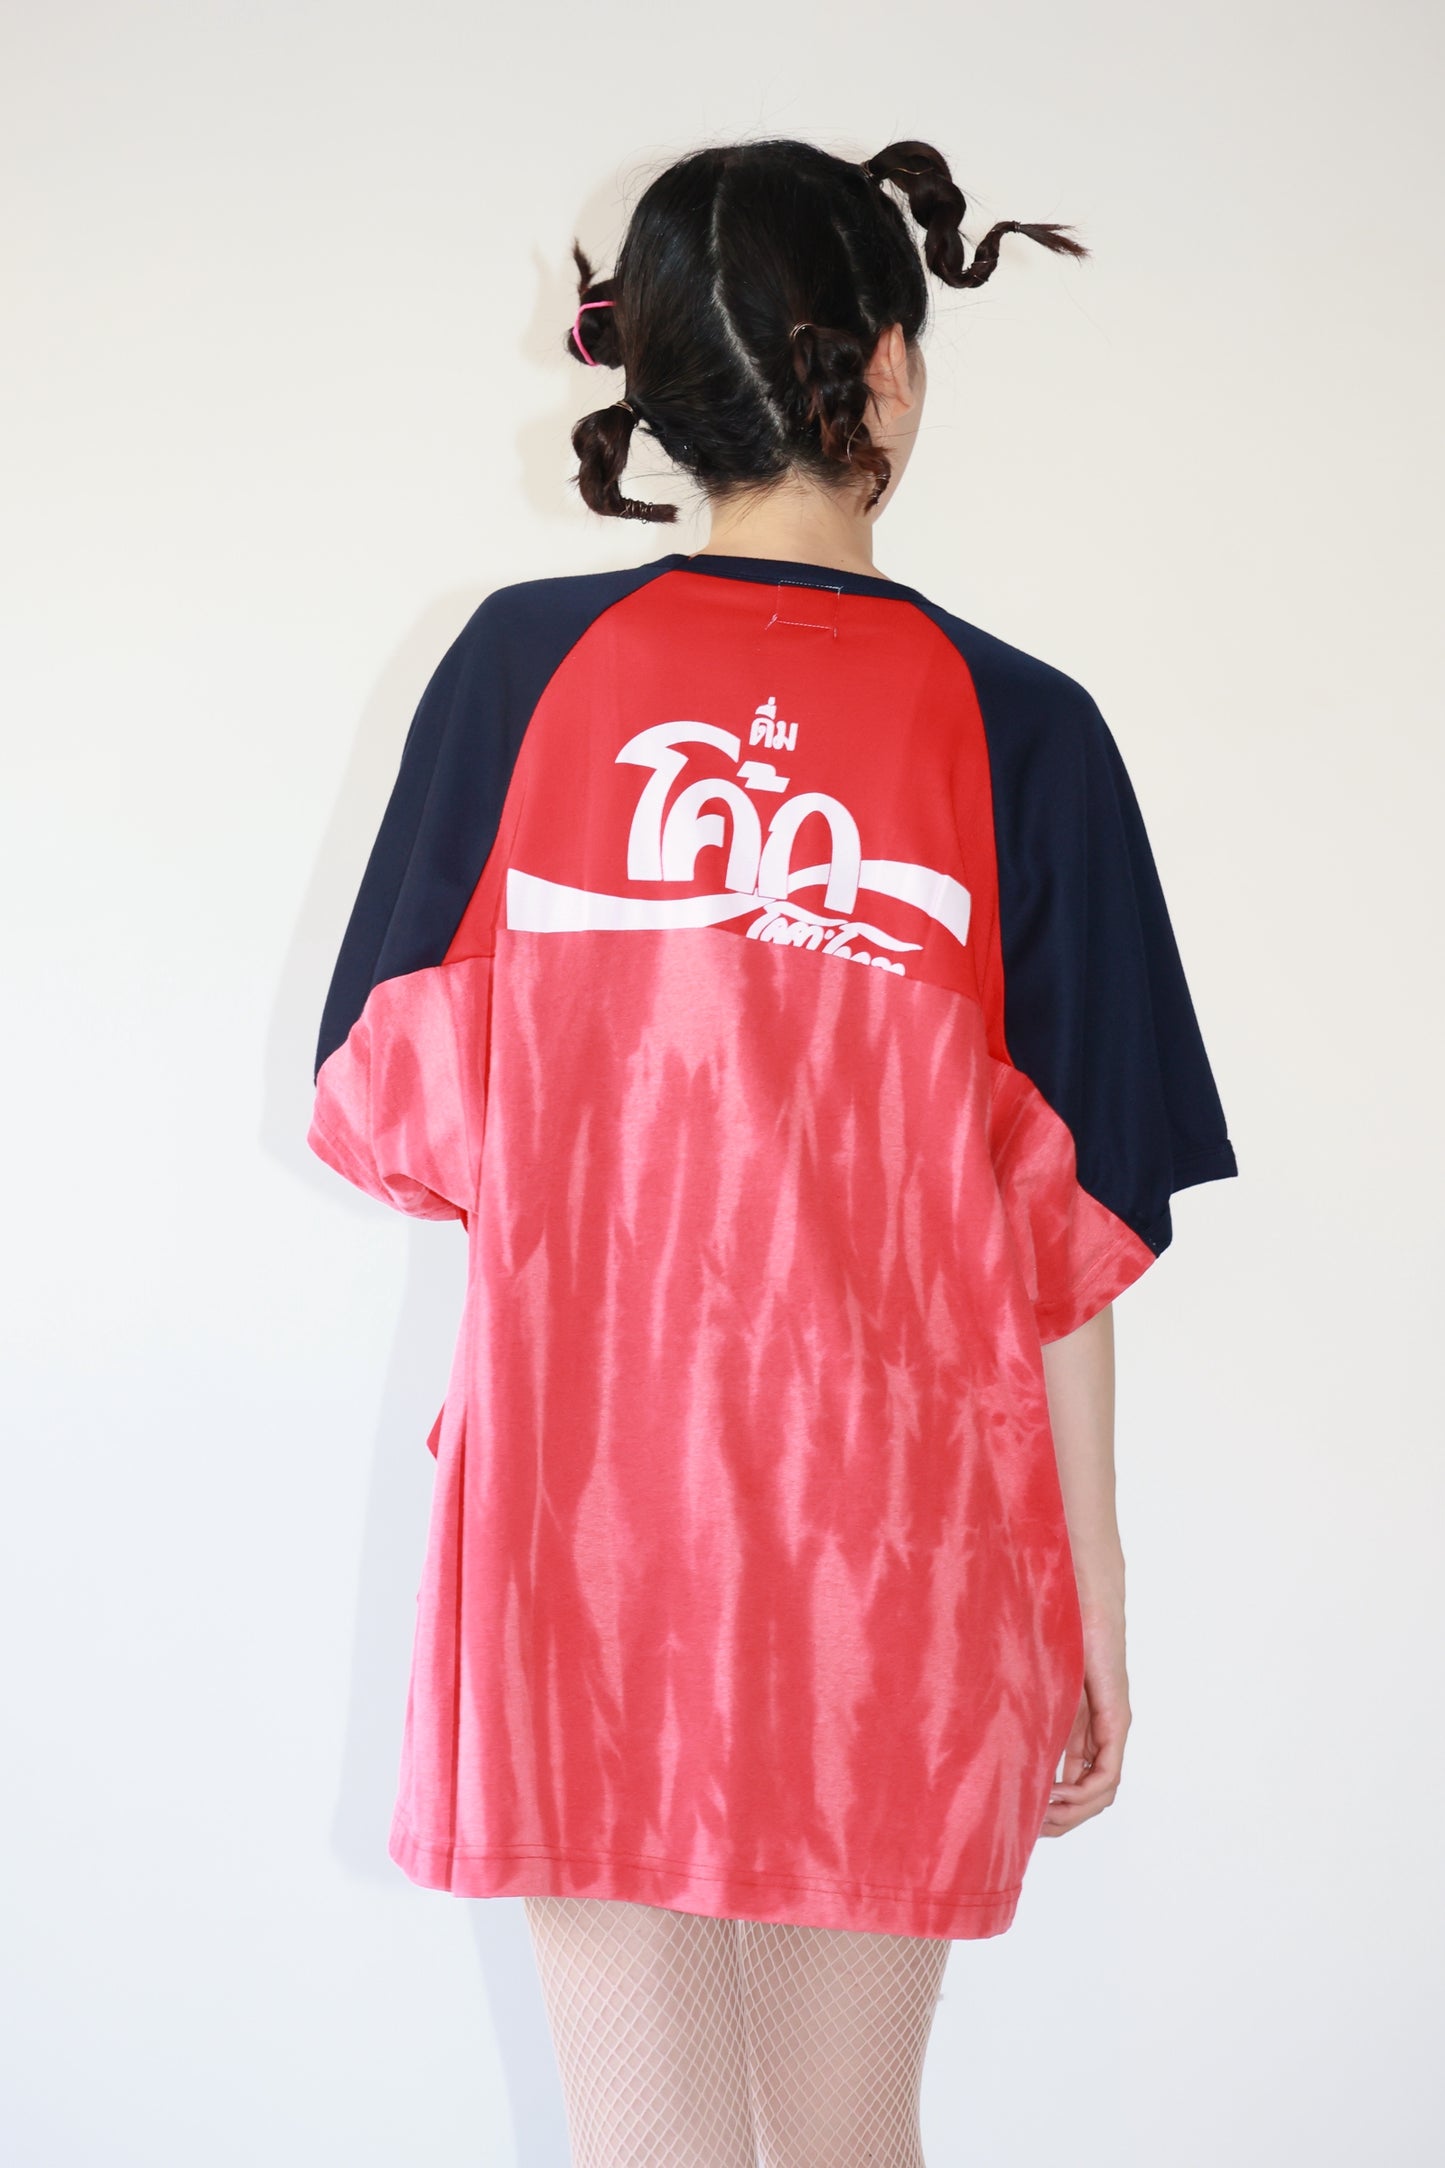 POTTOxUDW UP-CYCLED TIE-DYED T-SHIRTS, RAGLAN RED